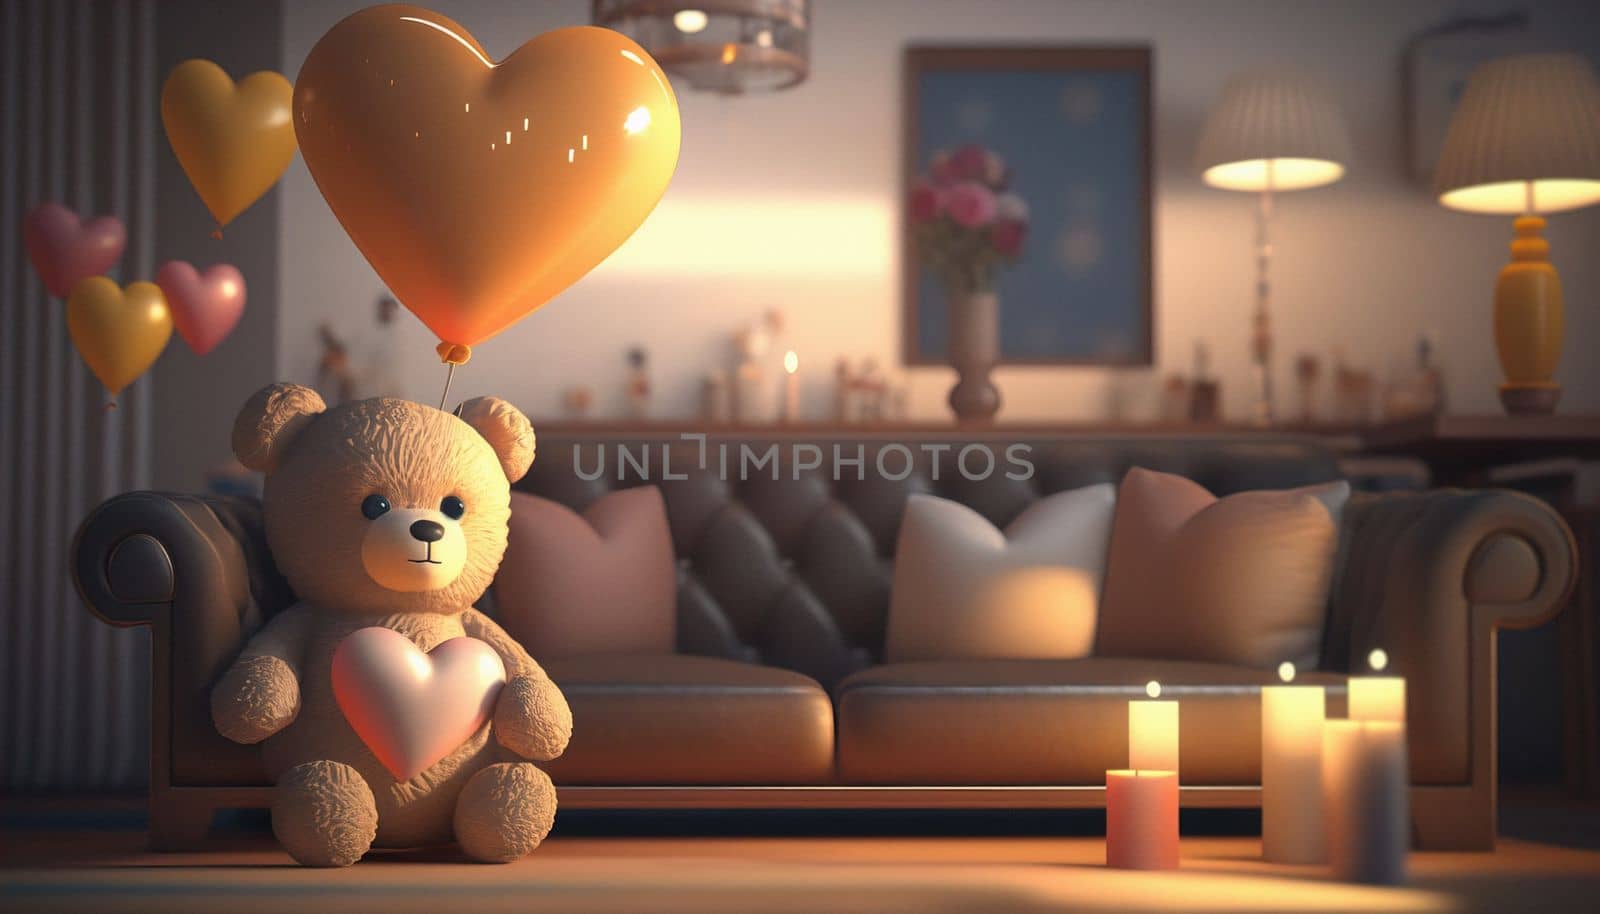 A photo of Teddy bear holding balloon heart sharp and candles, cozy living room background, 3D Rendering by igor010